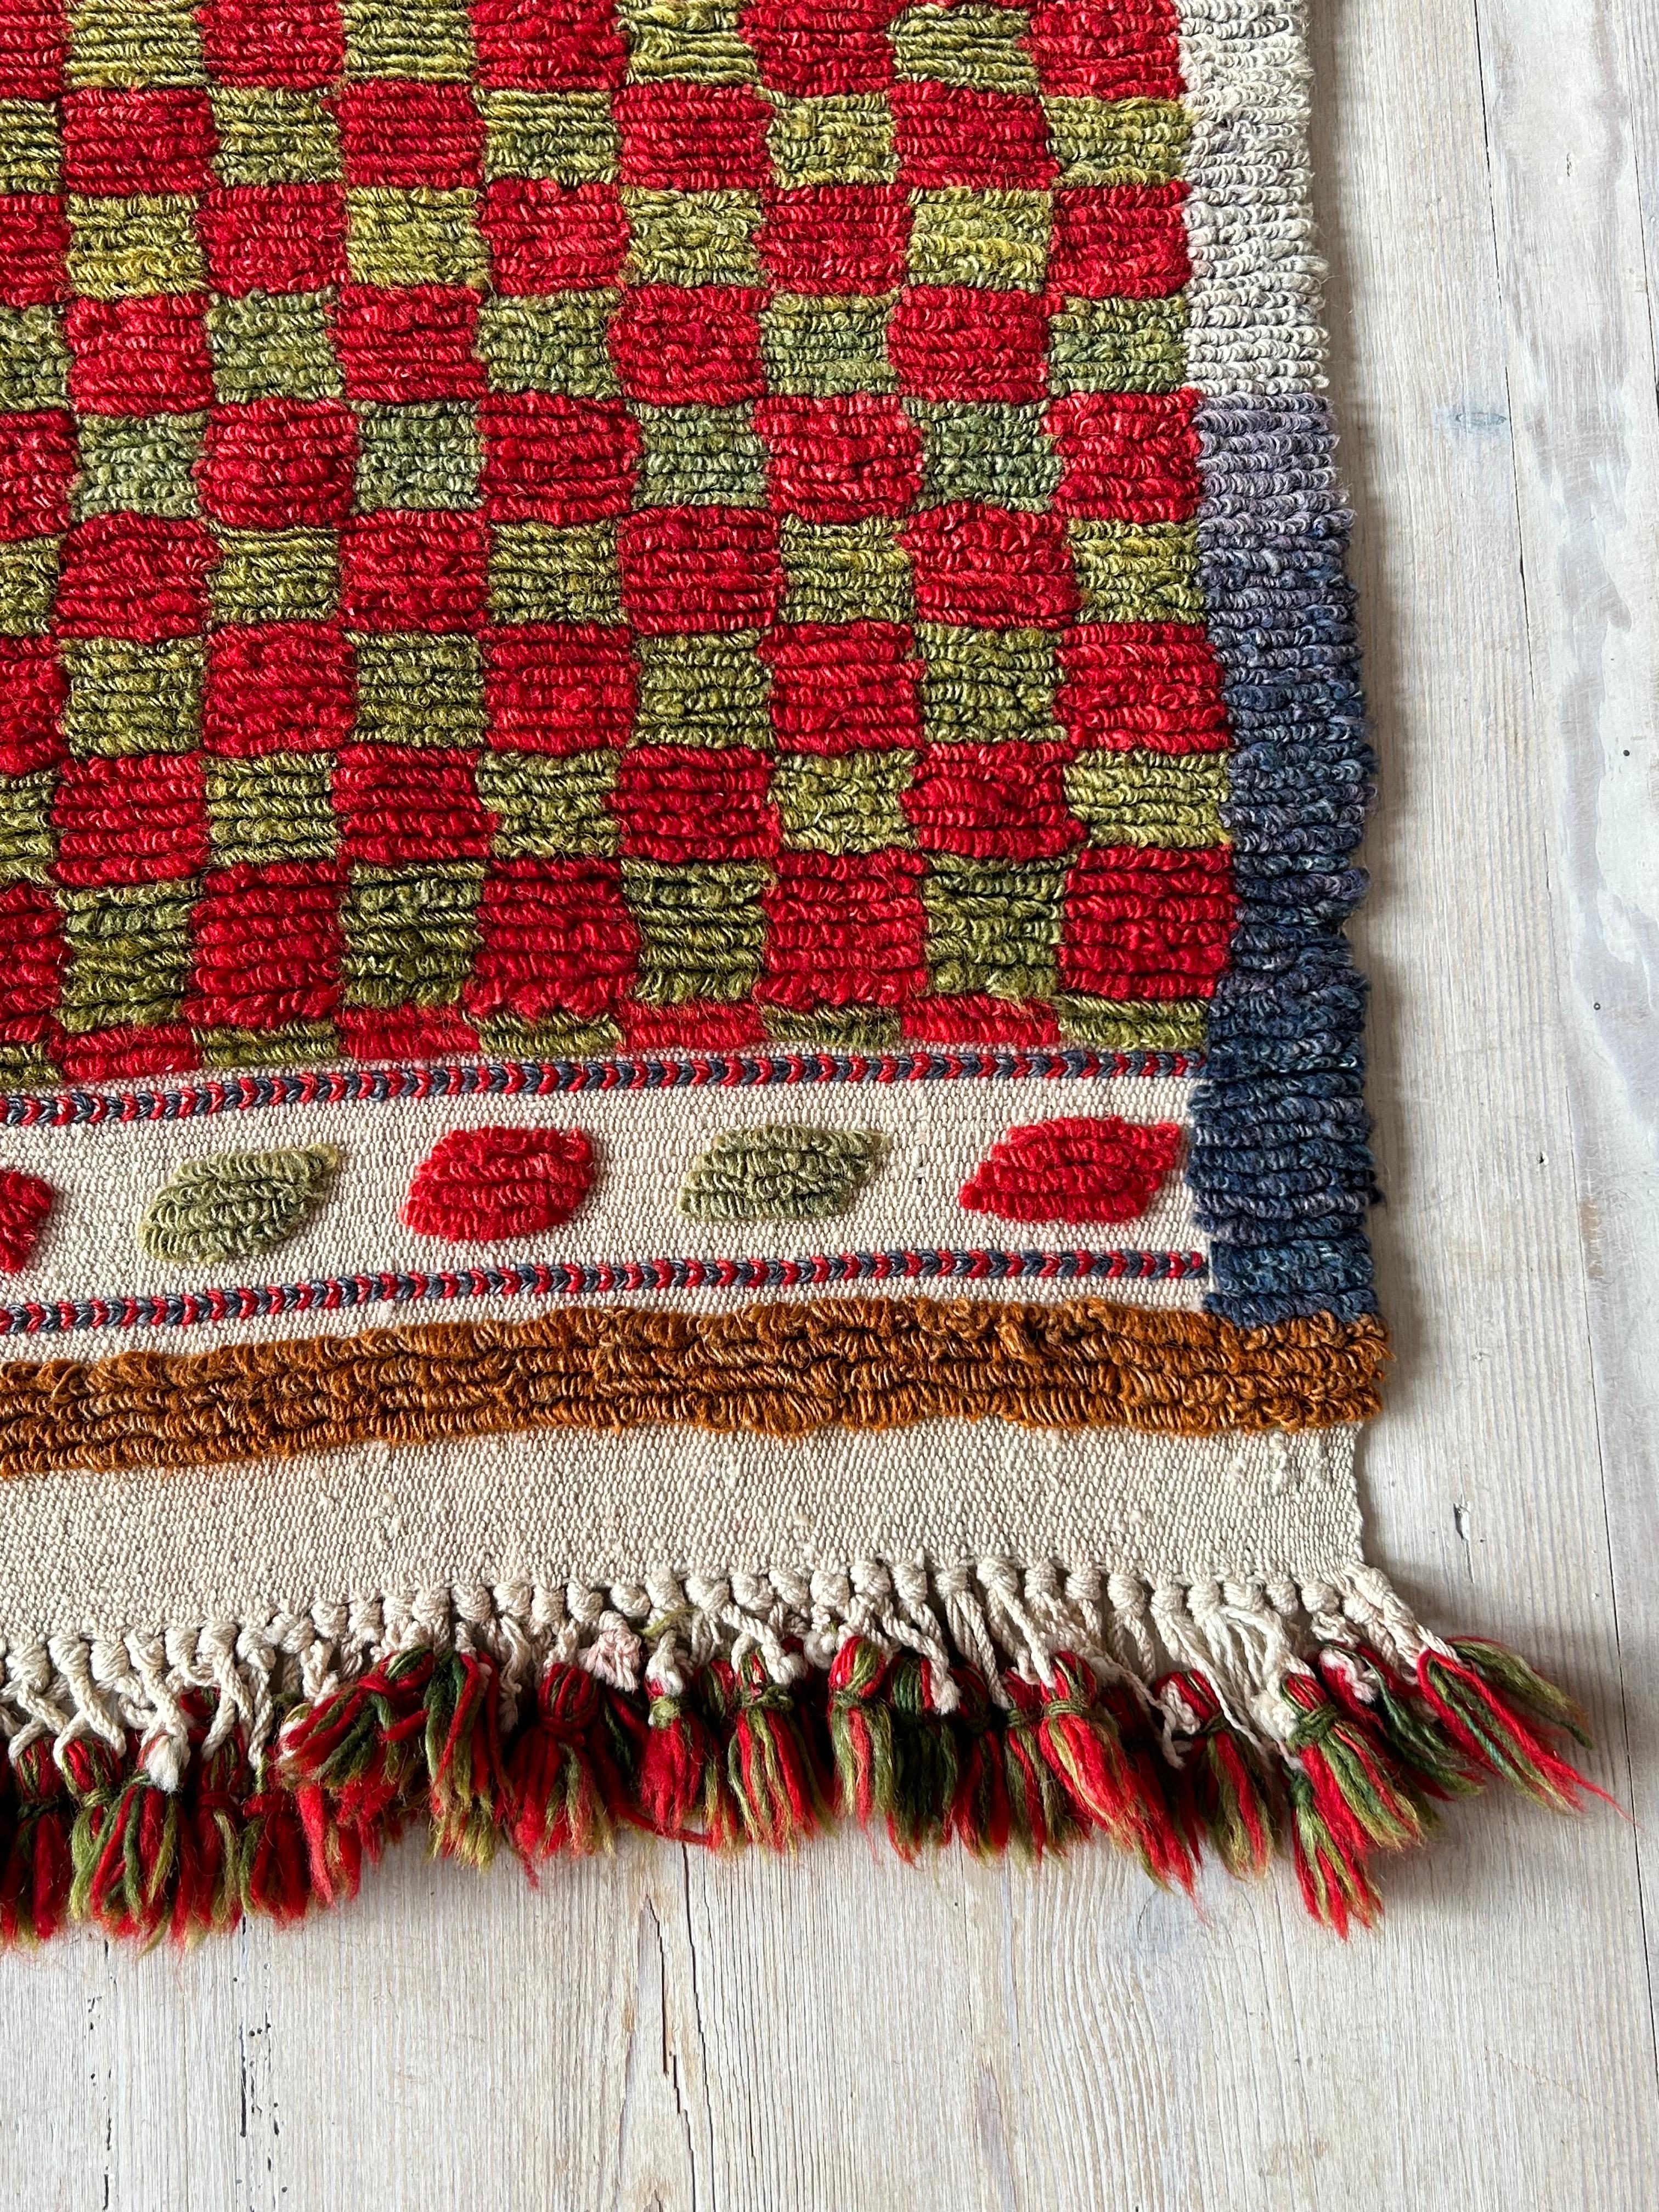 Vintage Angora Loop Pile Rug in Red & Green Check Pattern, Turkey, 20th Century For Sale 1